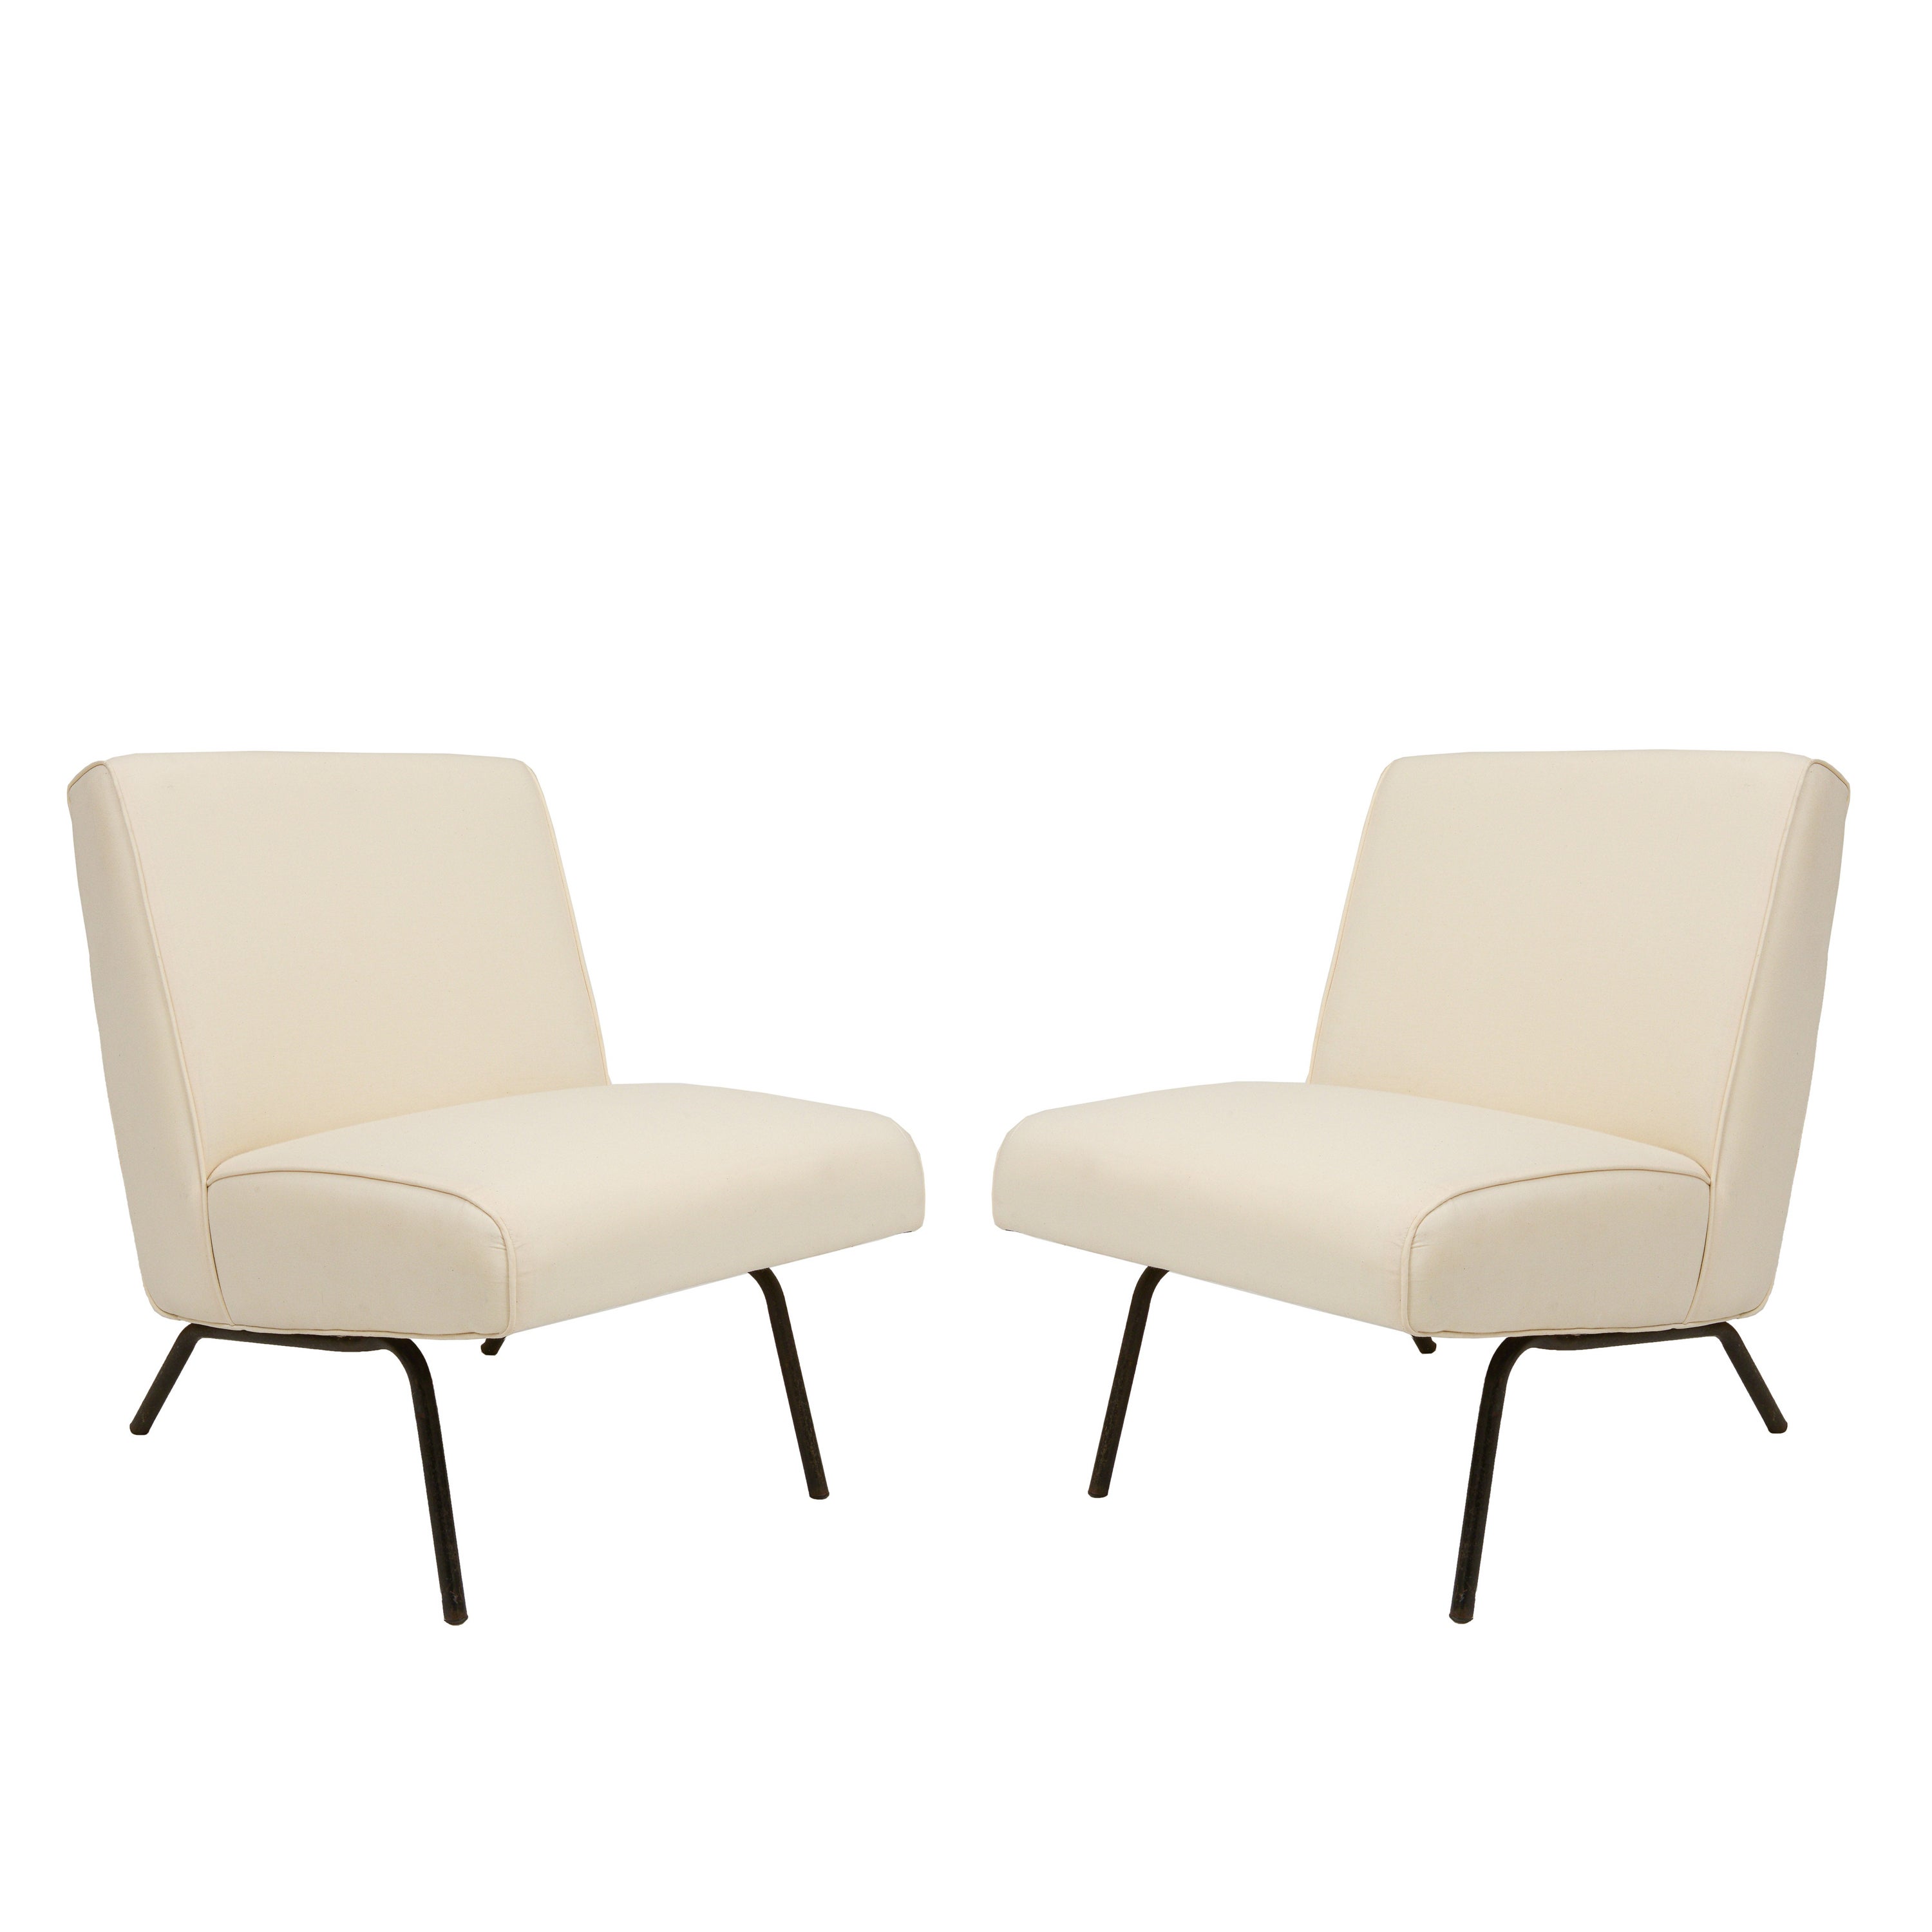 Joseph Andre Motte white chair with iron legs, France 1960.
Beautiful and elegant pair of chairs. Chic and sophisticate. Trademark legs of Joseph Andre Motte. One of the premier designers of the modern French movement. Comfortable and stable.

Price